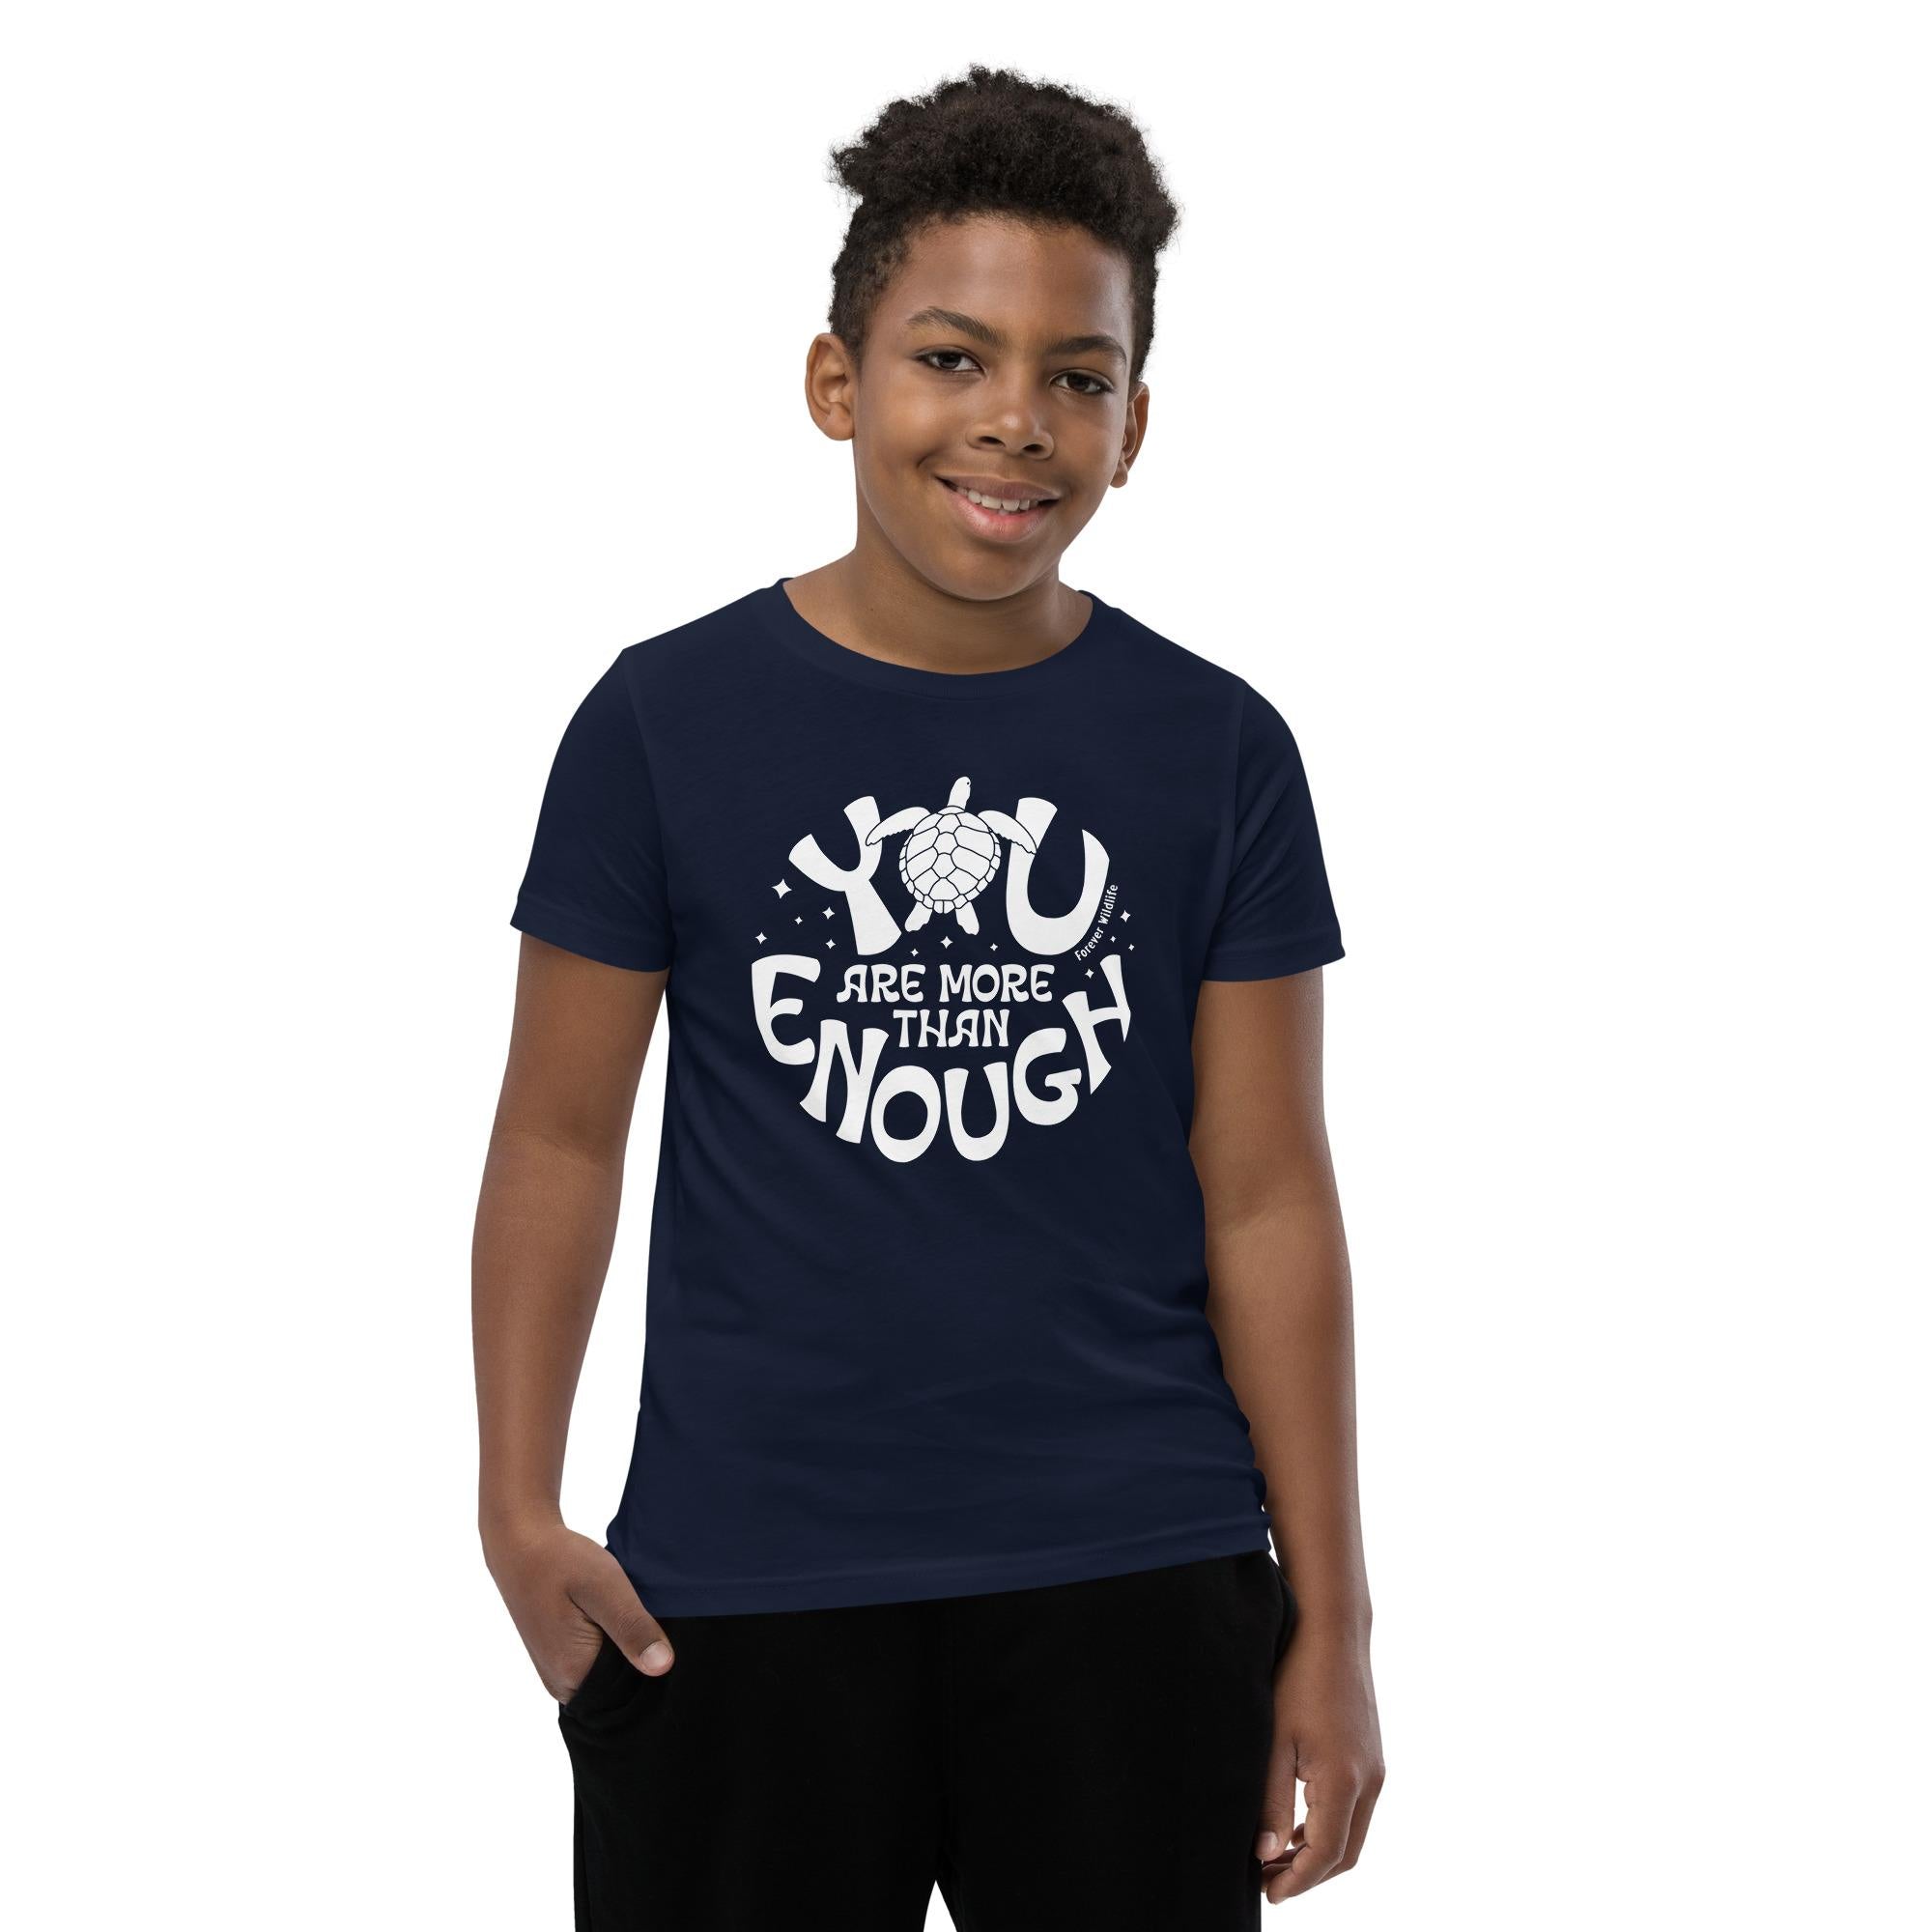 Teen wearing Navy Sea Turtle Youth T-Shirt with Sea Turtle graphic as part of Wildlife T Shirts, Wildlife Clothing & Apparel by Forever Wildlife